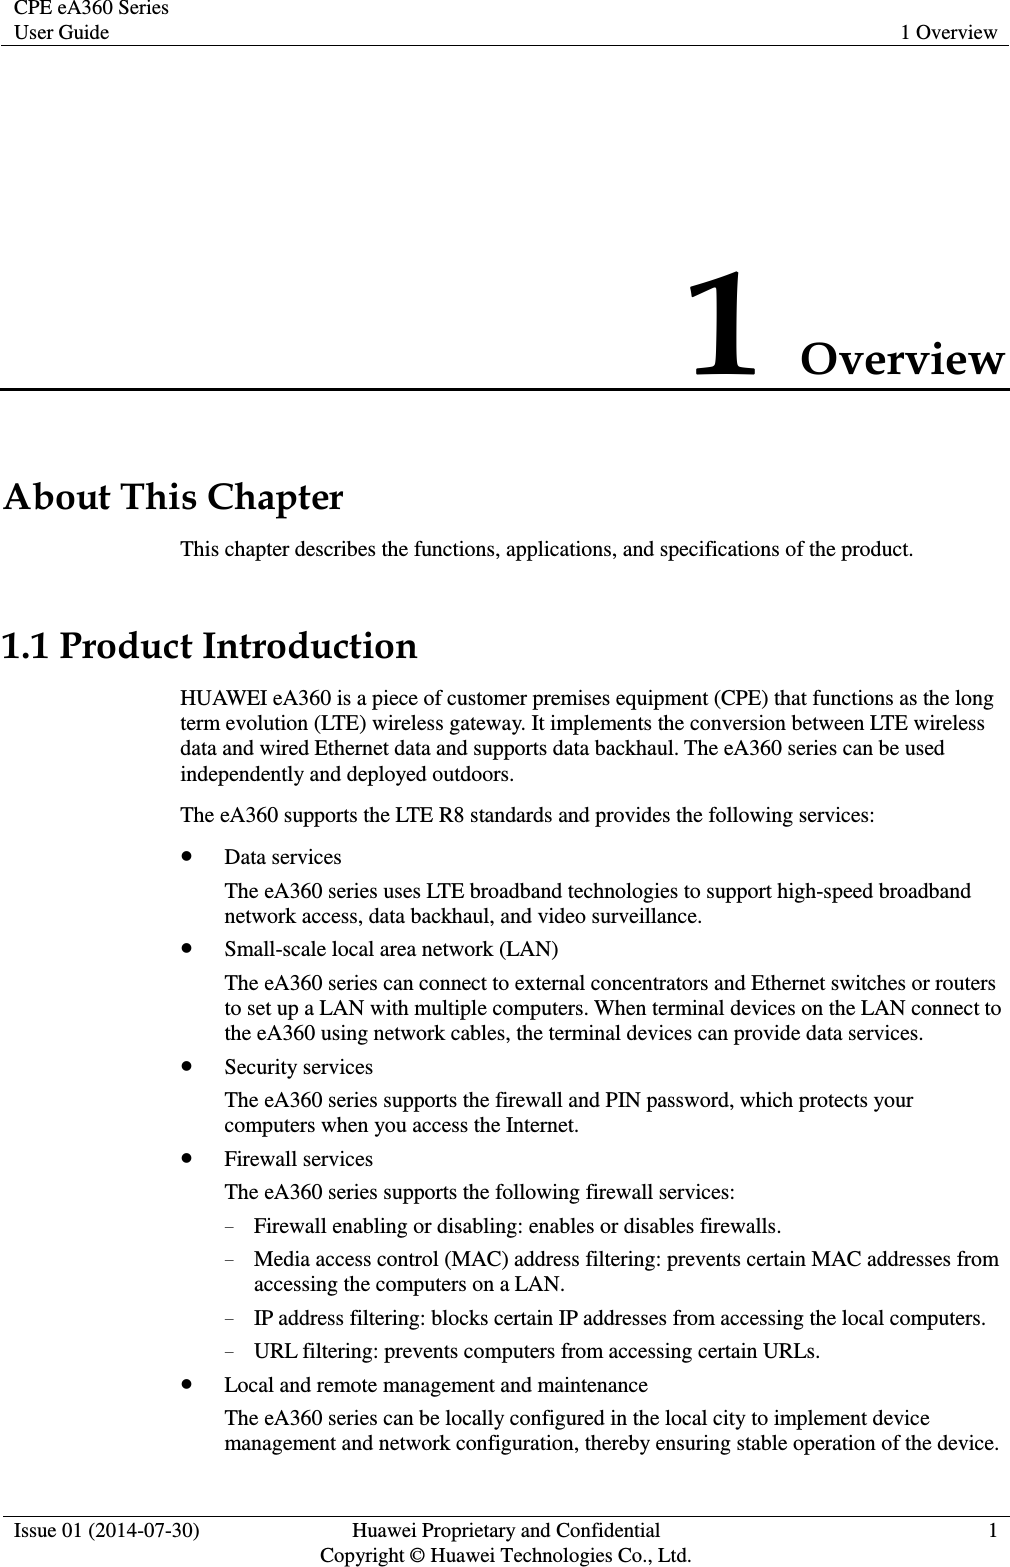 CPE eA360 Series User Guide 1 Overview  Issue 01 (2014-07-30) Huawei Proprietary and Confidential                                     Copyright © Huawei Technologies Co., Ltd. 1  1 Overview About This Chapter This chapter describes the functions, applications, and specifications of the product. 1.1 Product Introduction HUAWEI eA360 is a piece of customer premises equipment (CPE) that functions as the long term evolution (LTE) wireless gateway. It implements the conversion between LTE wireless data and wired Ethernet data and supports data backhaul. The eA360 series can be used independently and deployed outdoors.   The eA360 supports the LTE R8 standards and provides the following services:  Data services The eA360 series uses LTE broadband technologies to support high-speed broadband network access, data backhaul, and video surveillance.  Small-scale local area network (LAN) The eA360 series can connect to external concentrators and Ethernet switches or routers to set up a LAN with multiple computers. When terminal devices on the LAN connect to the eA360 using network cables, the terminal devices can provide data services.    Security services The eA360 series supports the firewall and PIN password, which protects your computers when you access the Internet.  Firewall services The eA360 series supports the following firewall services: − Firewall enabling or disabling: enables or disables firewalls. − Media access control (MAC) address filtering: prevents certain MAC addresses from accessing the computers on a LAN. − IP address filtering: blocks certain IP addresses from accessing the local computers. − URL filtering: prevents computers from accessing certain URLs.  Local and remote management and maintenance The eA360 series can be locally configured in the local city to implement device management and network configuration, thereby ensuring stable operation of the device. 